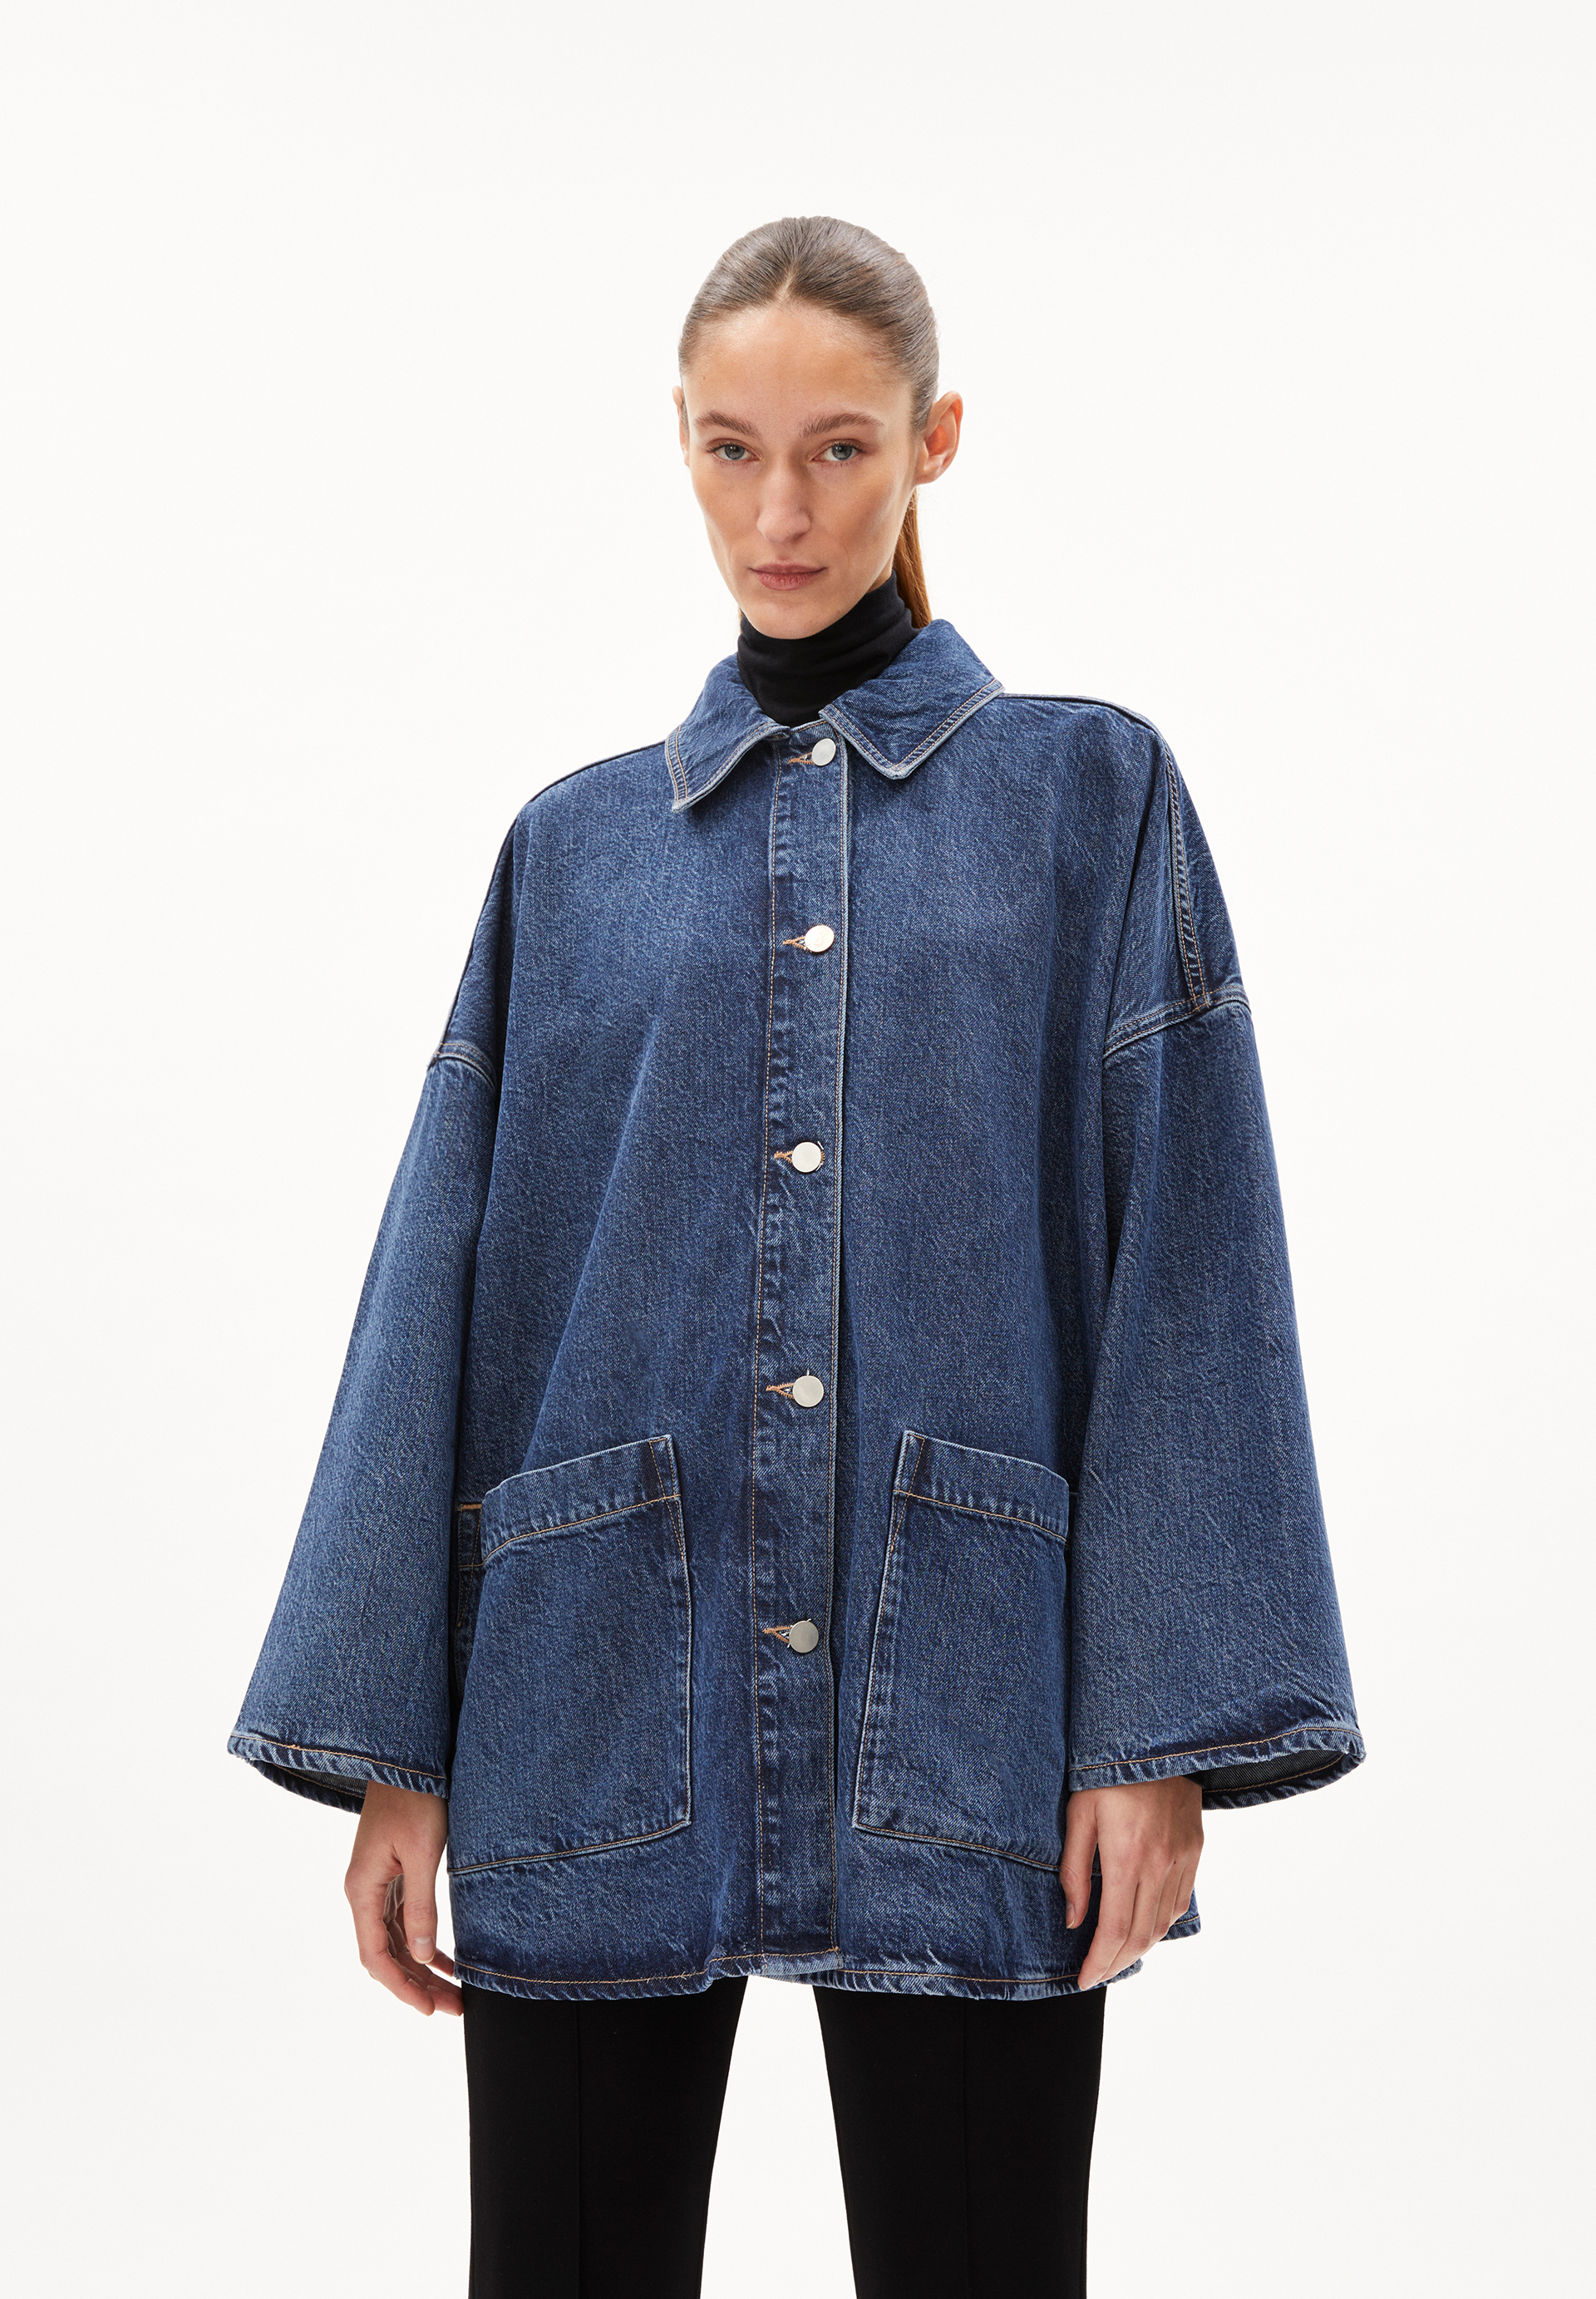 DRAAPY Denim Jacket Oversized Fit made of TENCEL™ Lyocell Mix